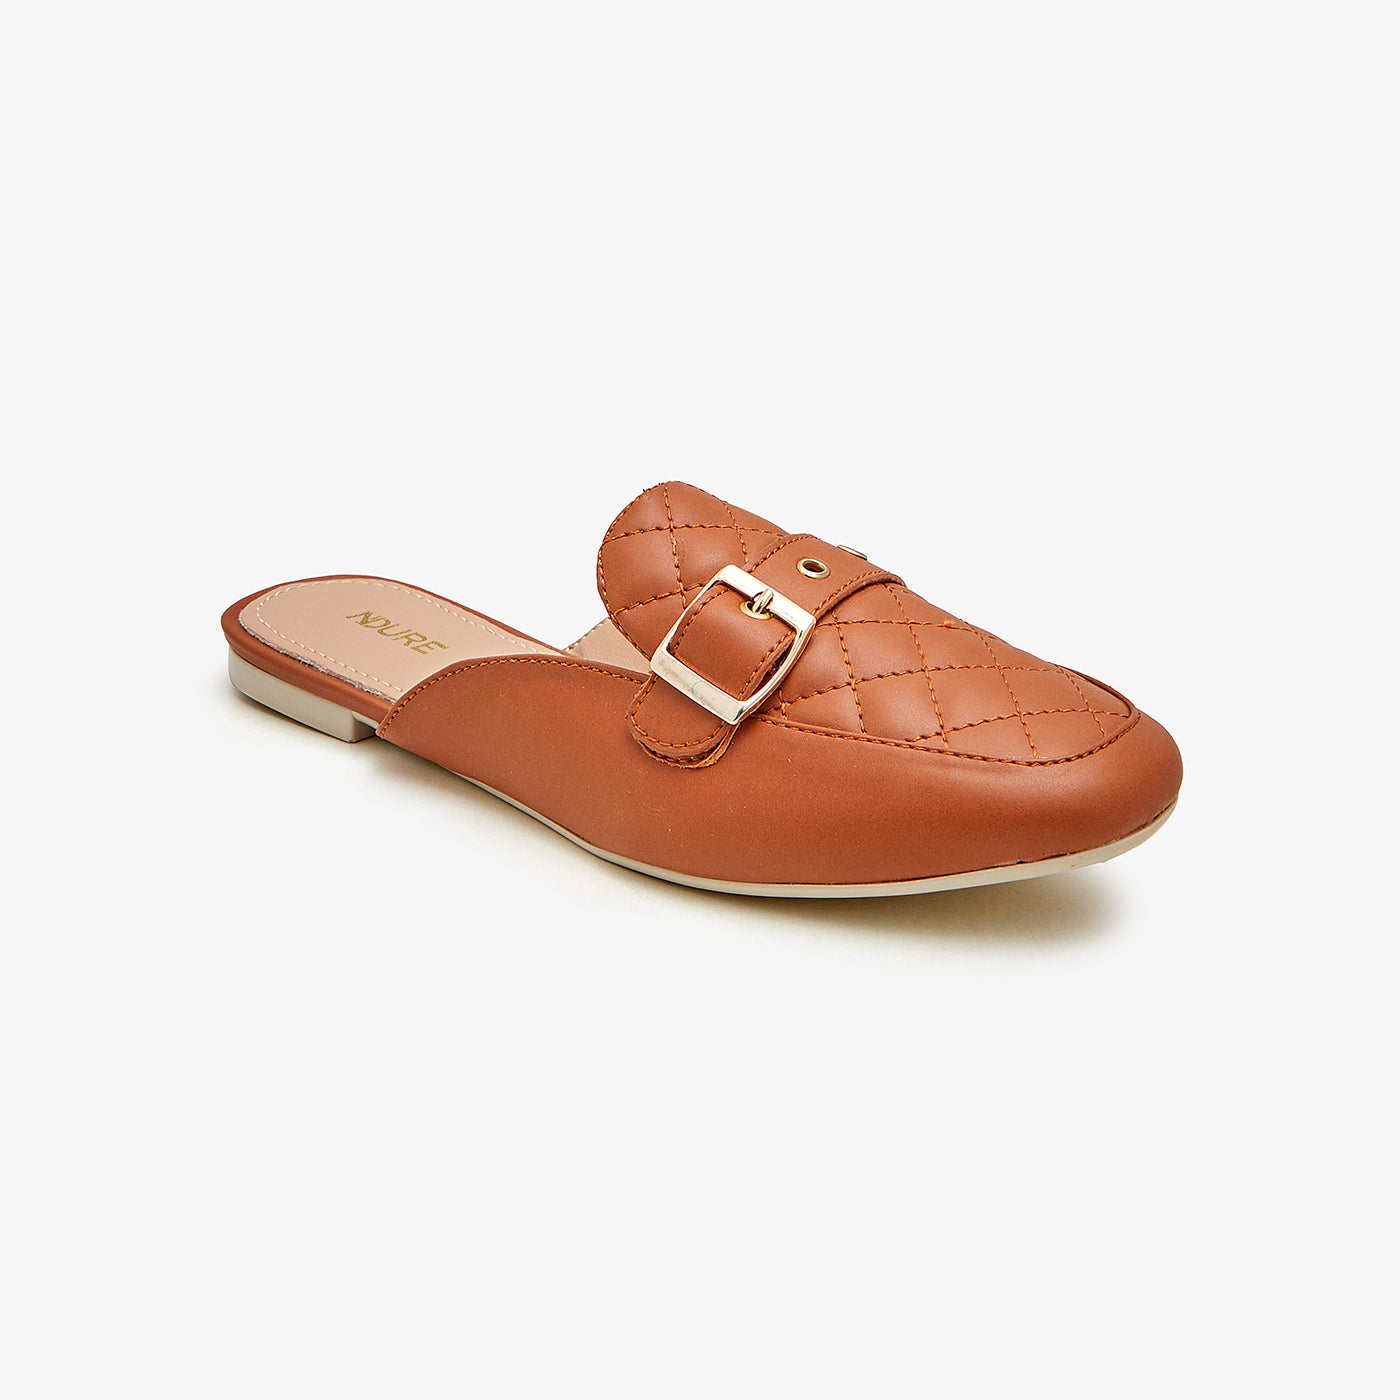 Women's Buckled Mules